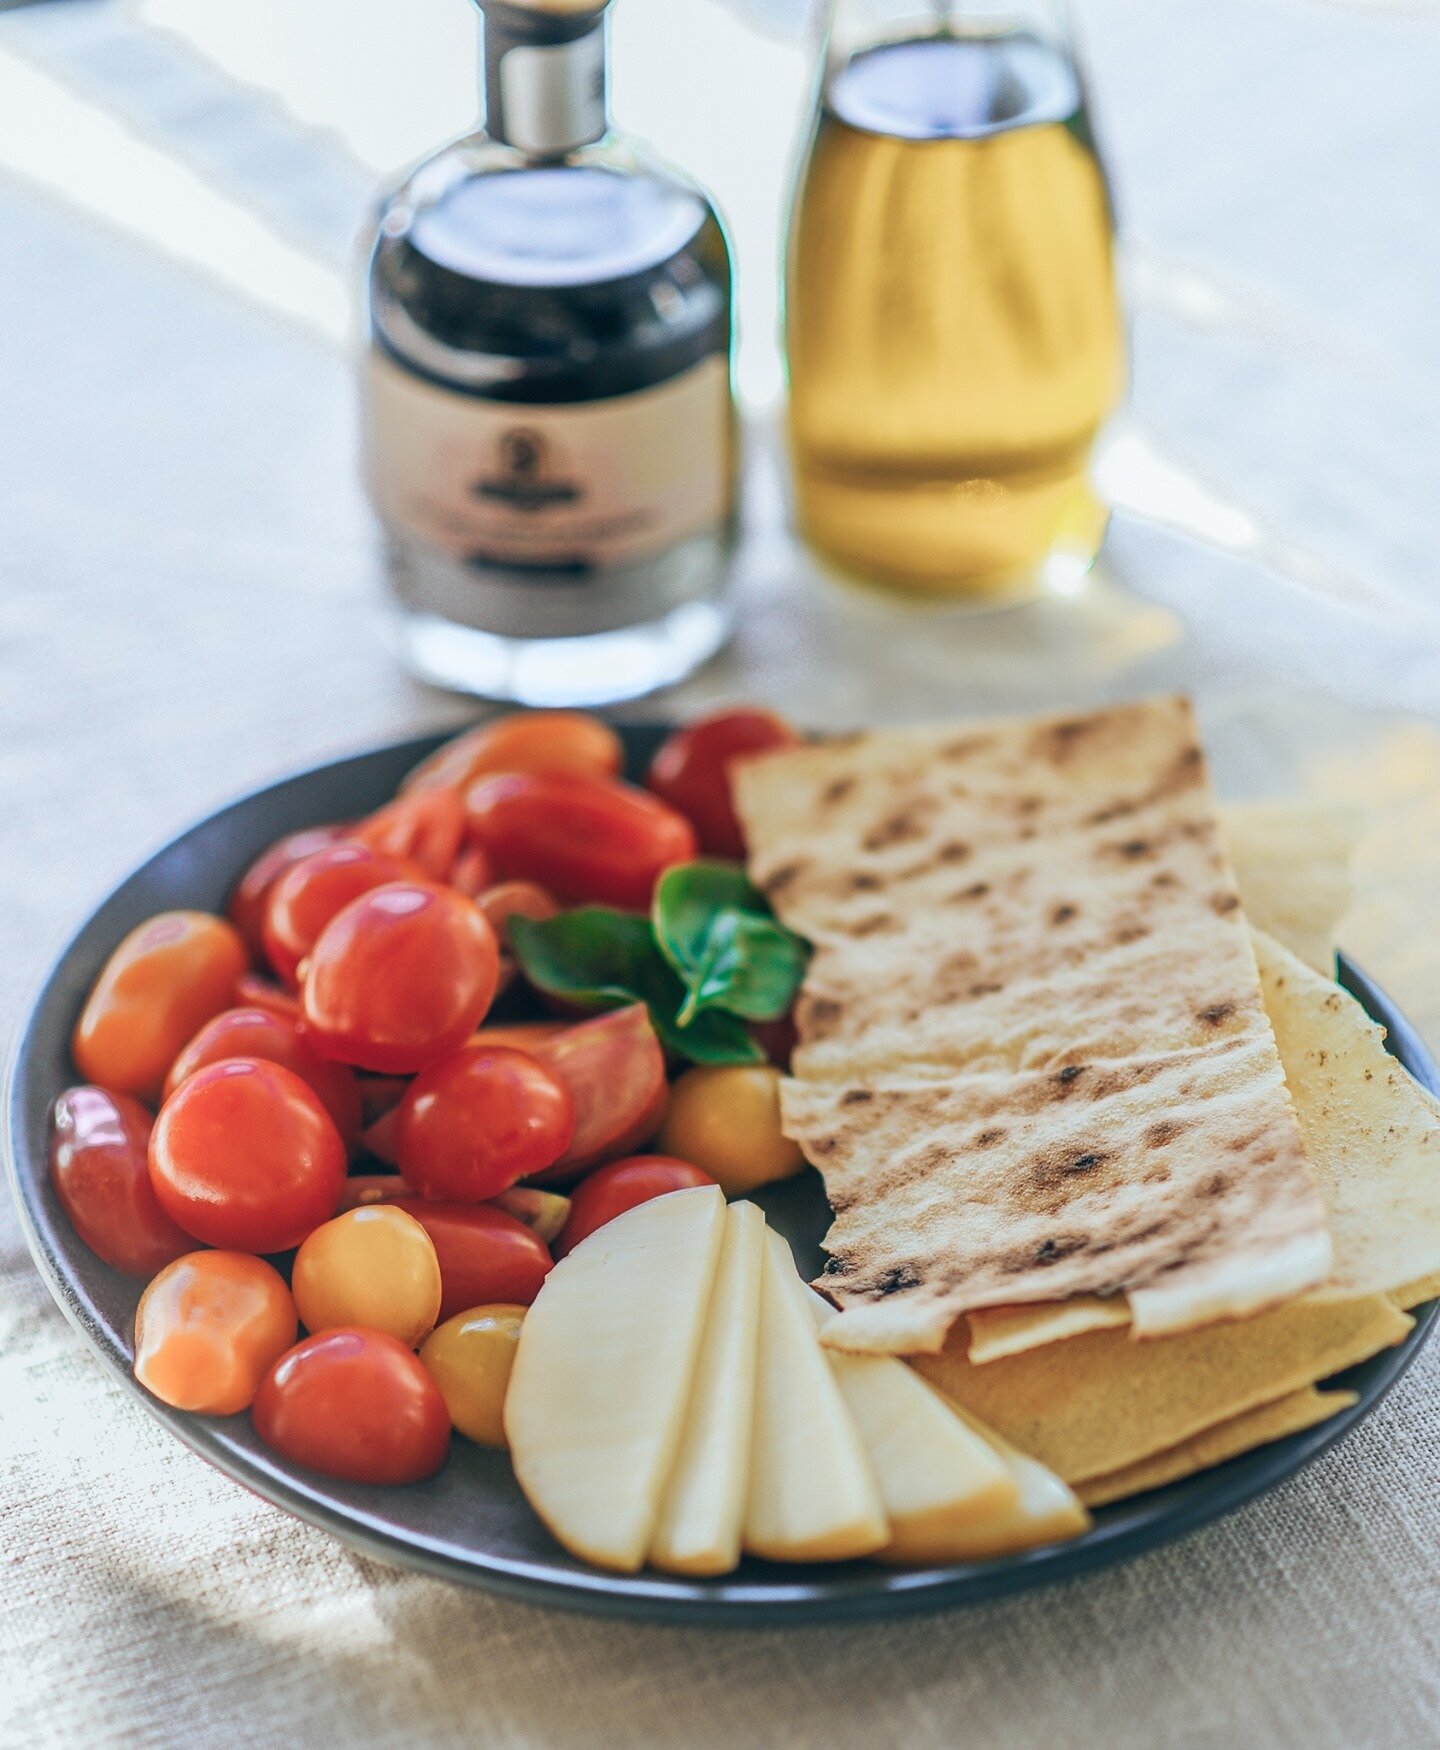 Noosa Reds with smoked scamorza &amp; Sicilian flatbread.⁠
⁠
One of the simple combo's from our Salumi E Mozzarella bar⁠
~⁠
#noosa #tomaotoes #oliveoil #balsamic #entree